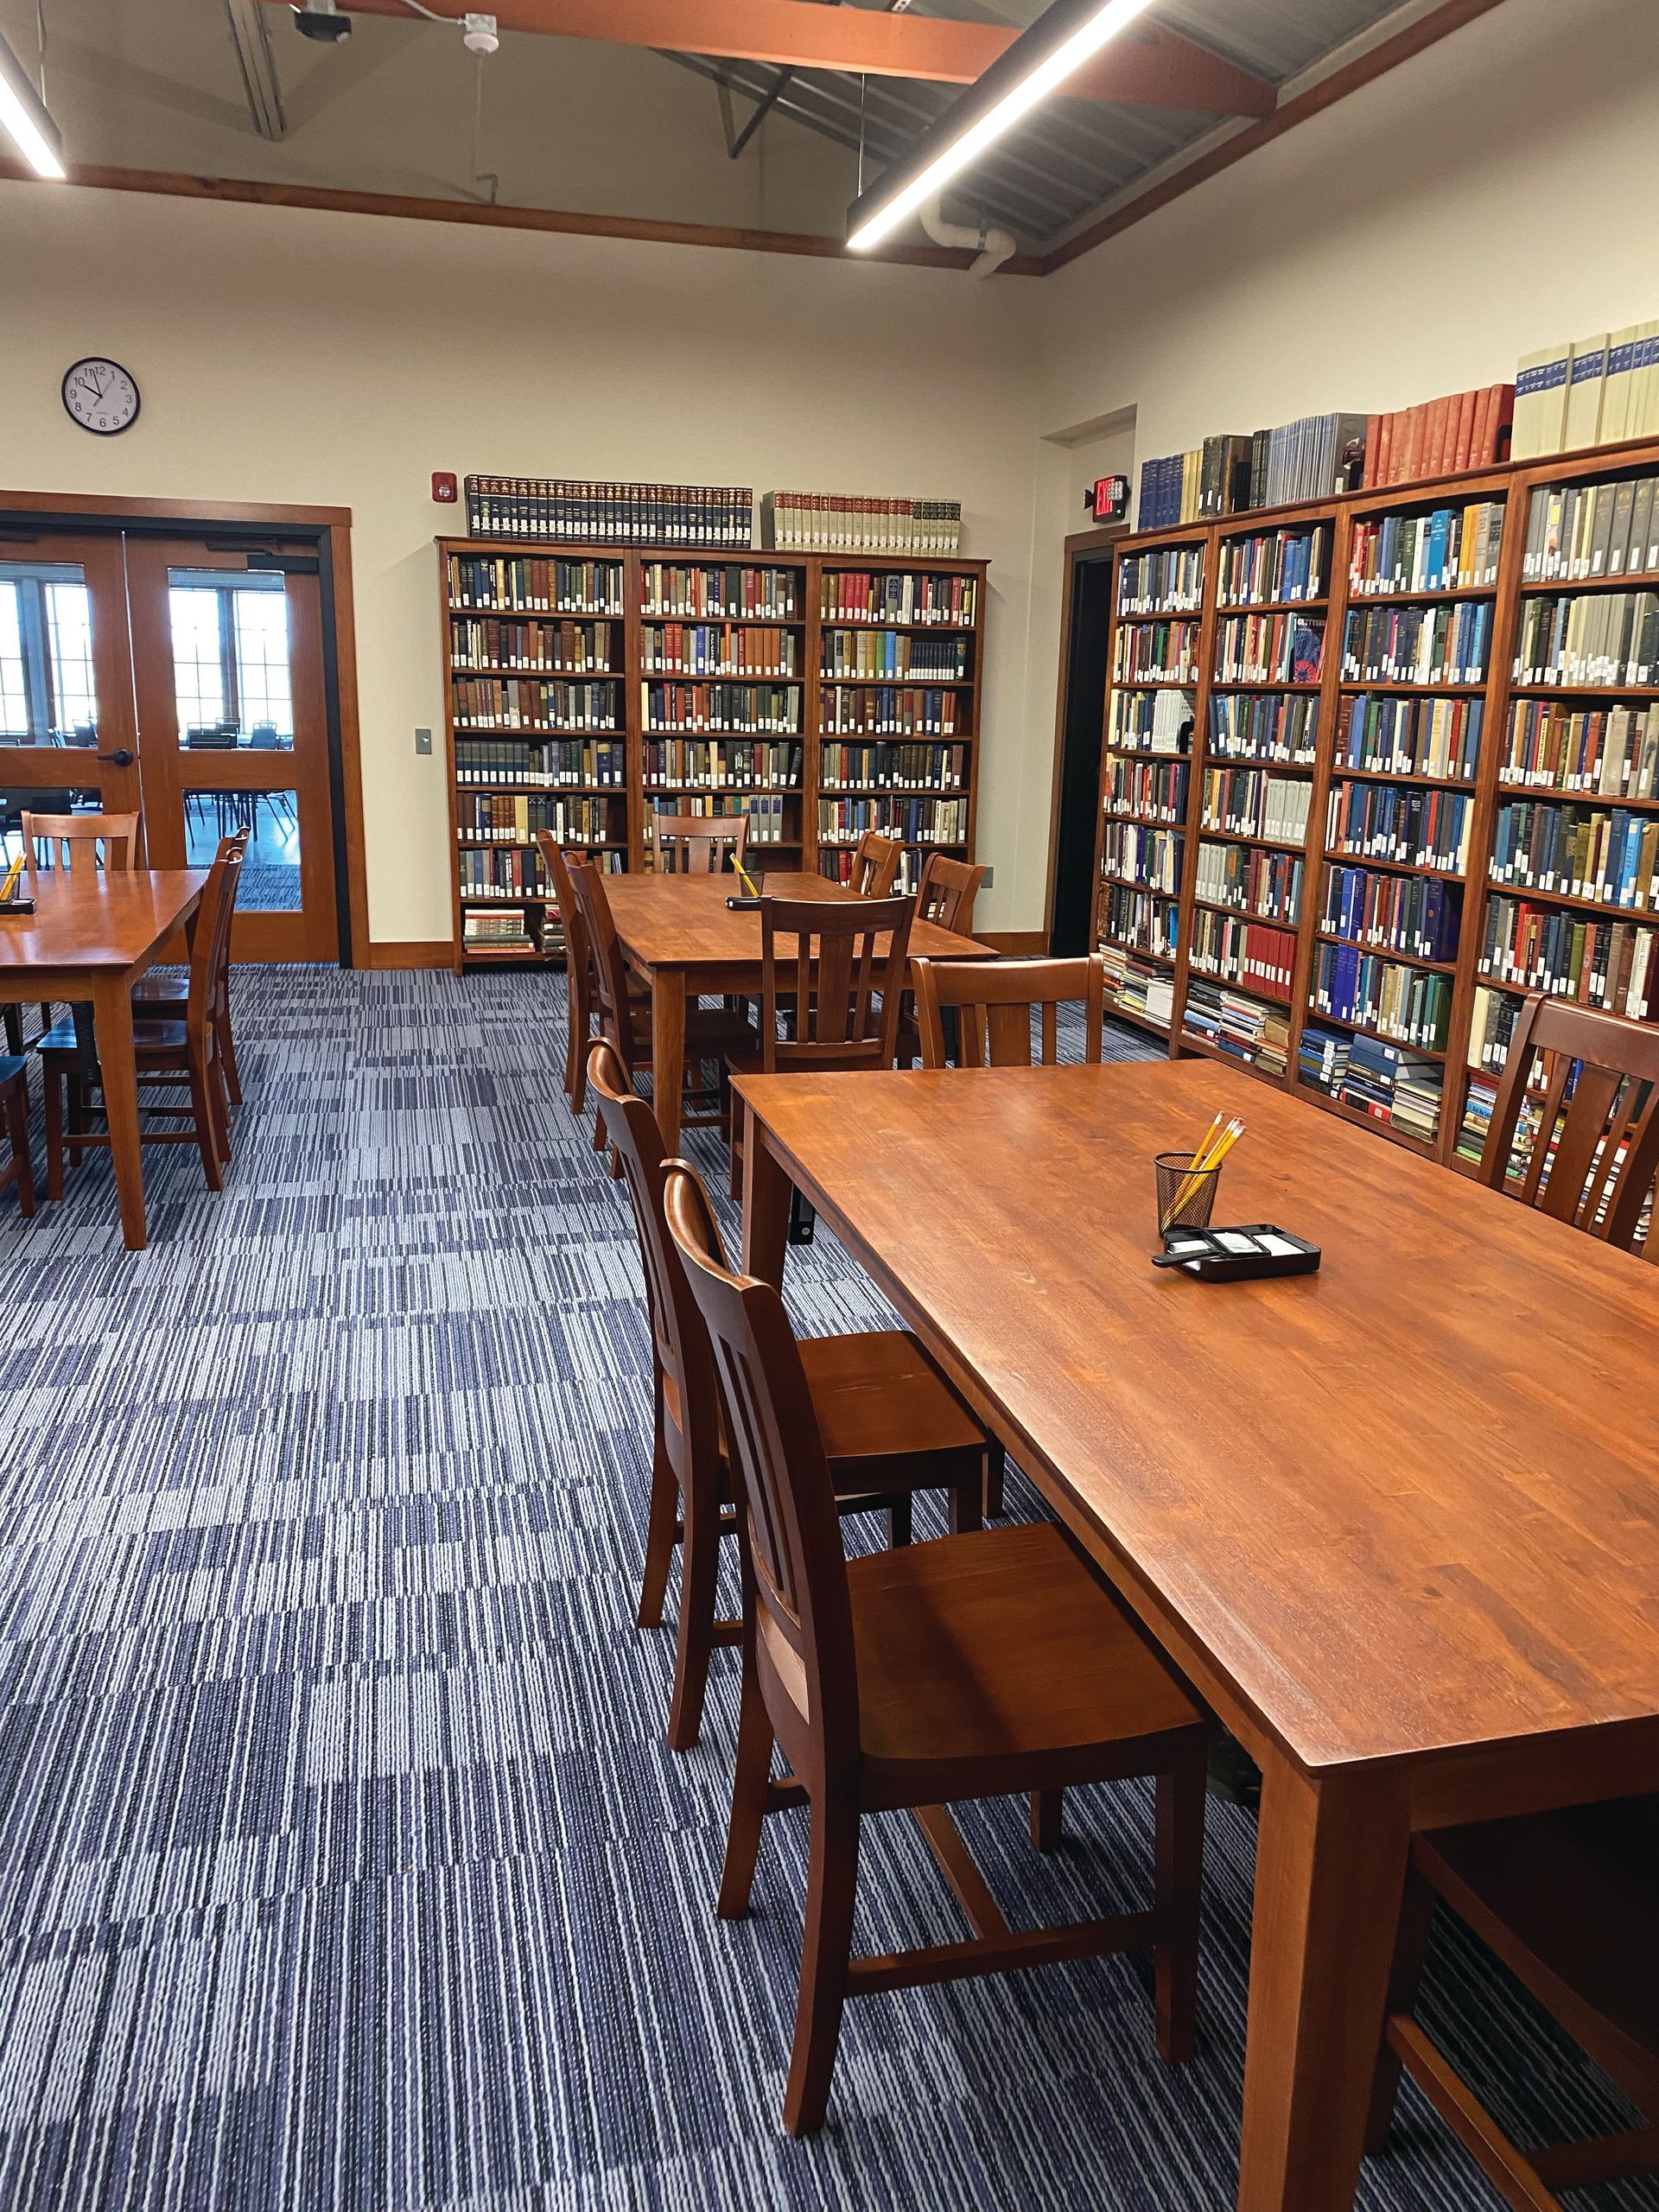 The Glatfelter Research Room